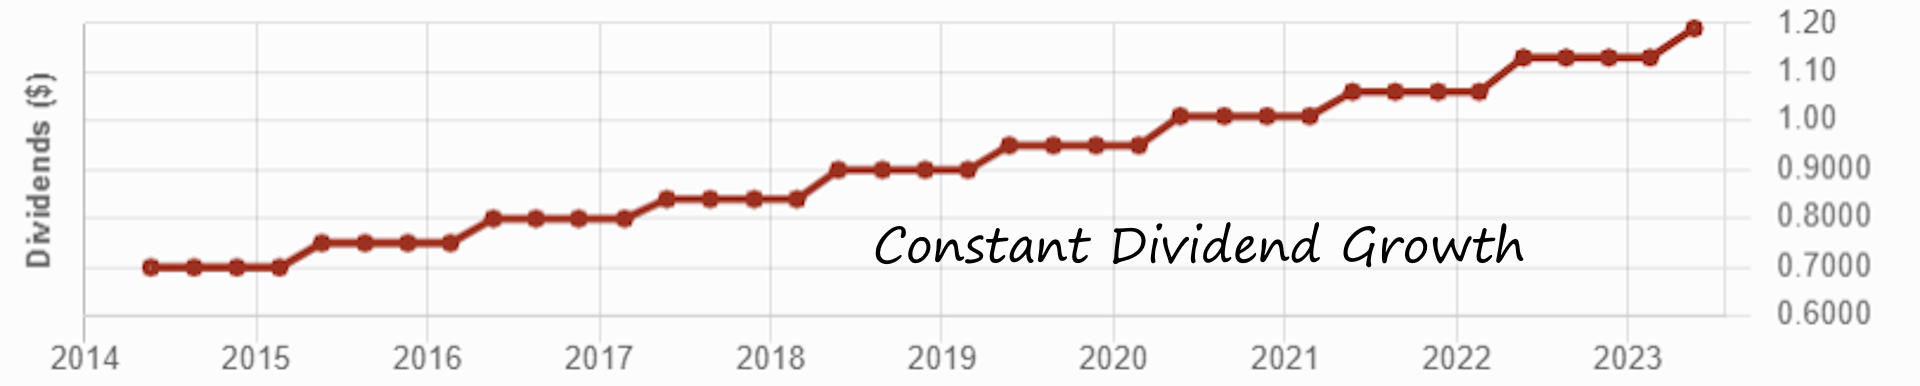 Graph showing constant dividend growth